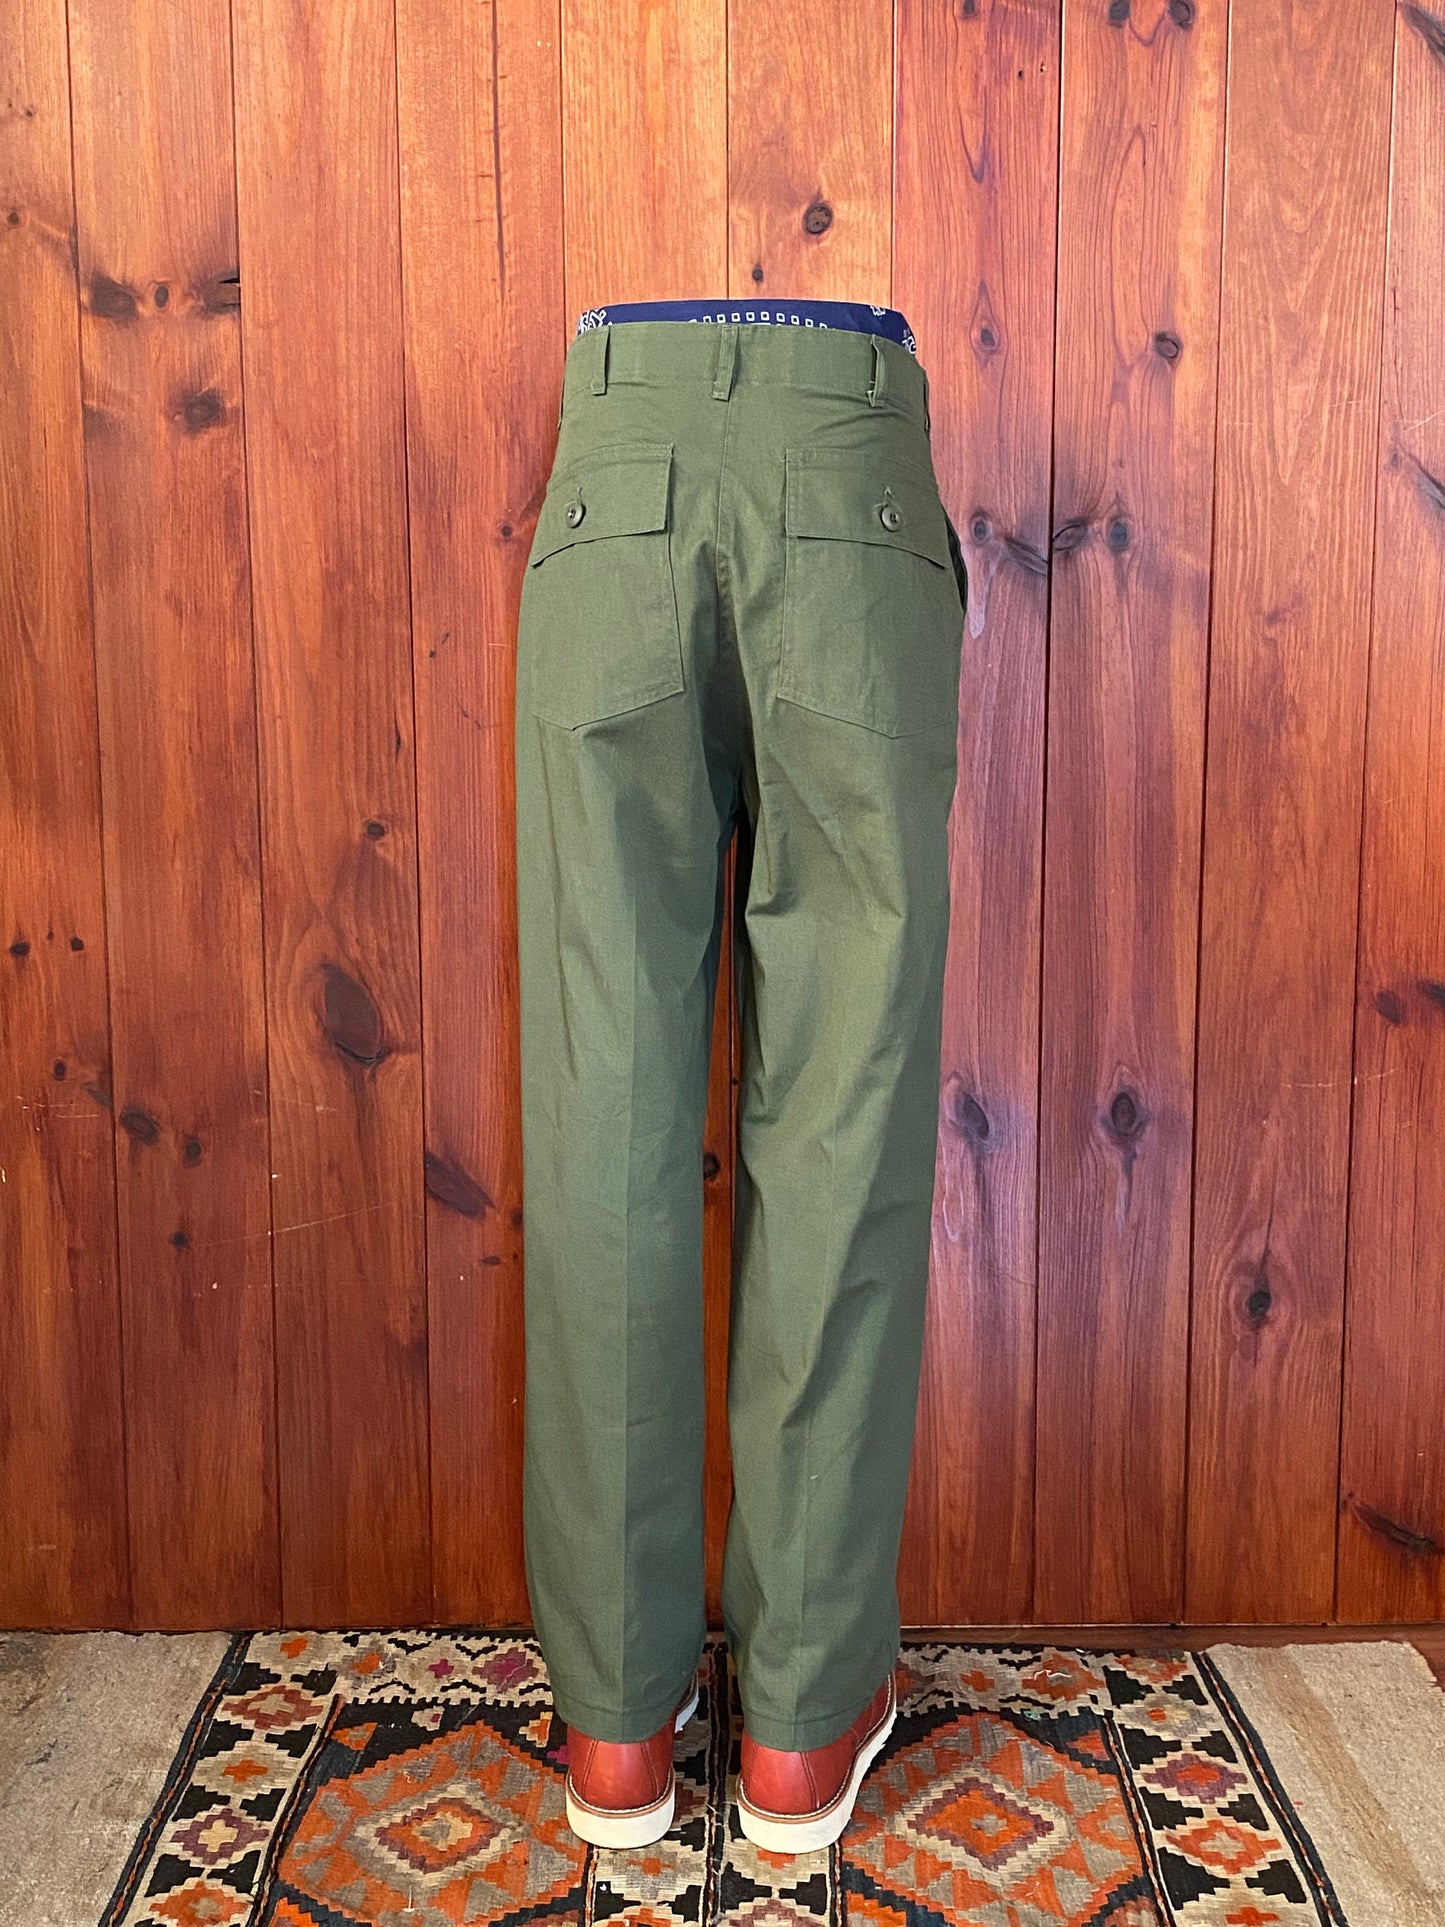 31X30 Authentic Vintage 1985 US Army OG-507 utility pants / Trousers fatigues